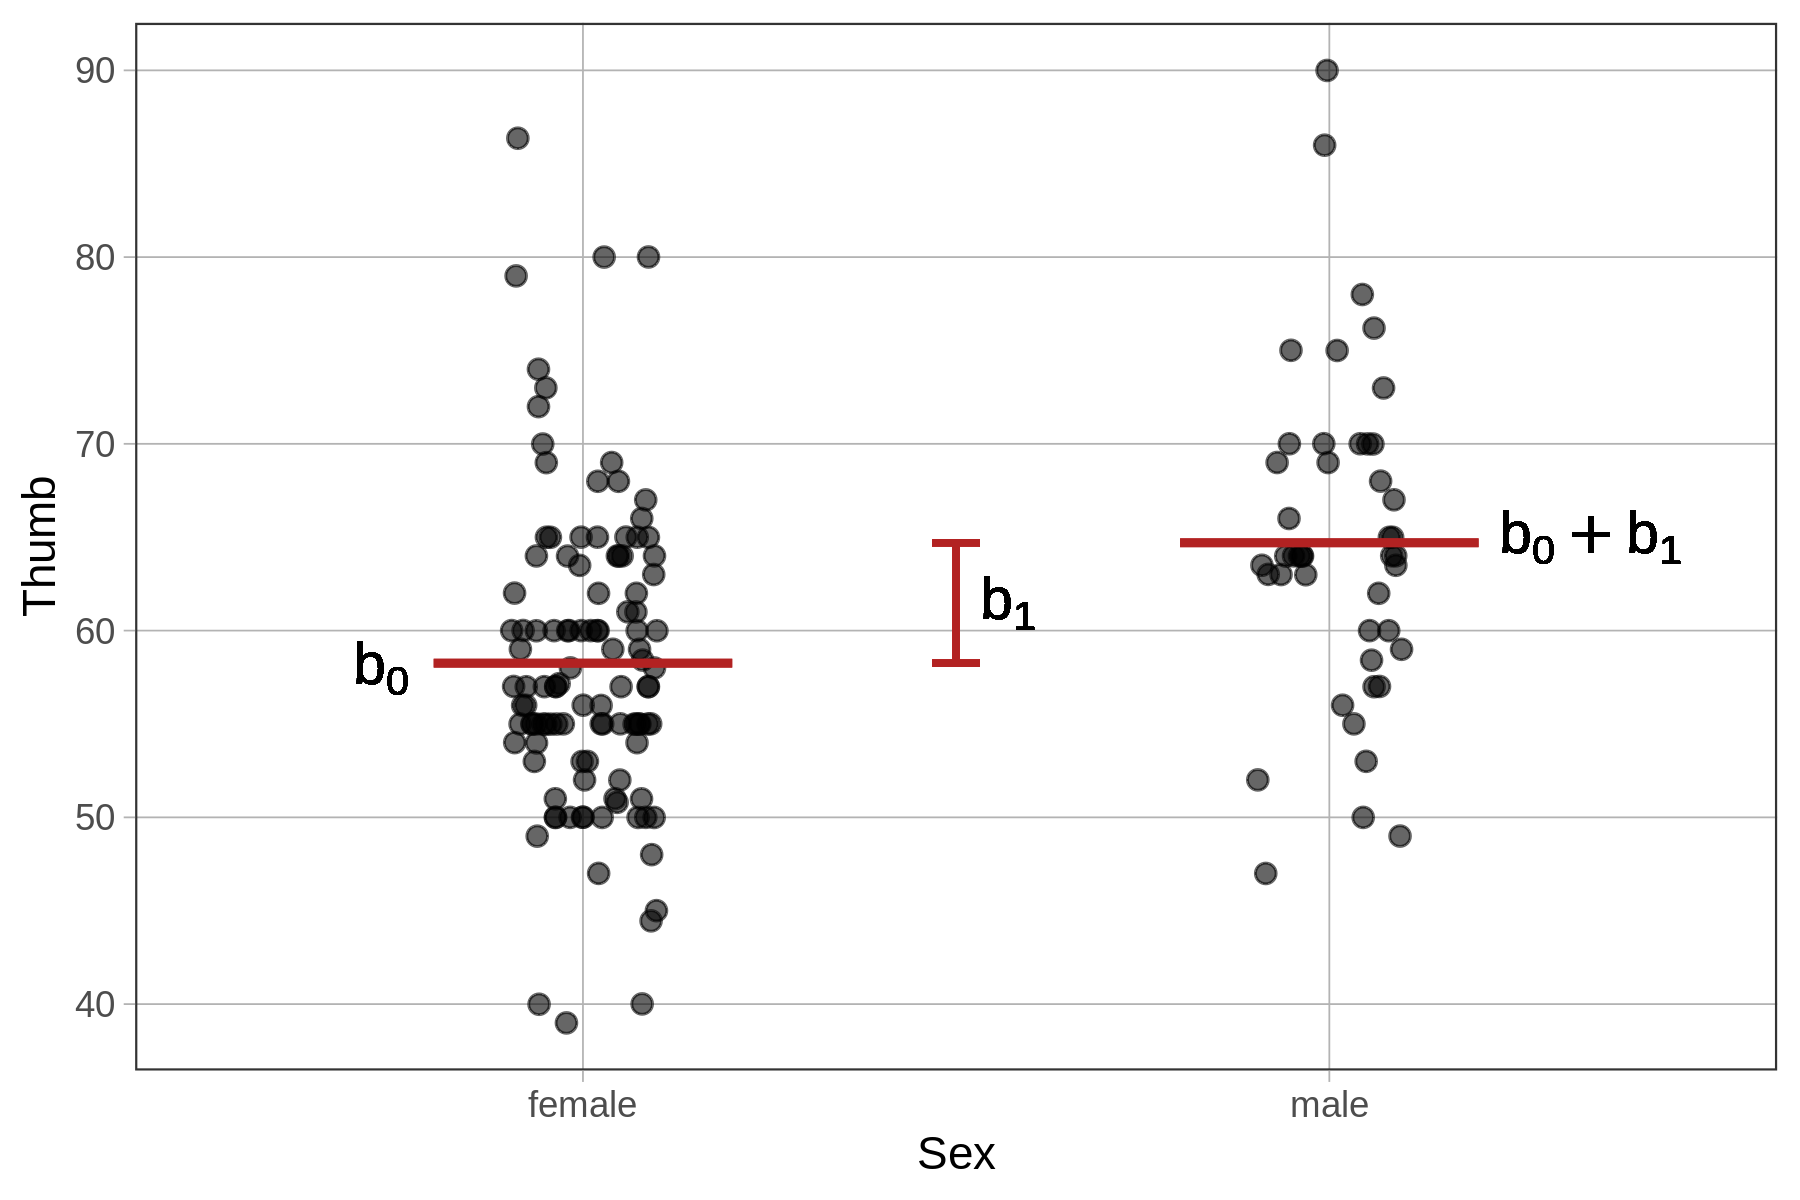 A jitter plot of the distribution of Thumb by Sex in the Fingers data frame, overlaid with a red horizontal line in each group showing the group mean. The line for the female group is labeled as b-sub-zero, the line for the male group is labeled b-sub-zero plus b-sub-1, and there is a vertical line in between them to indicate the distance between the two group means and it is labeled as b-sub-1.